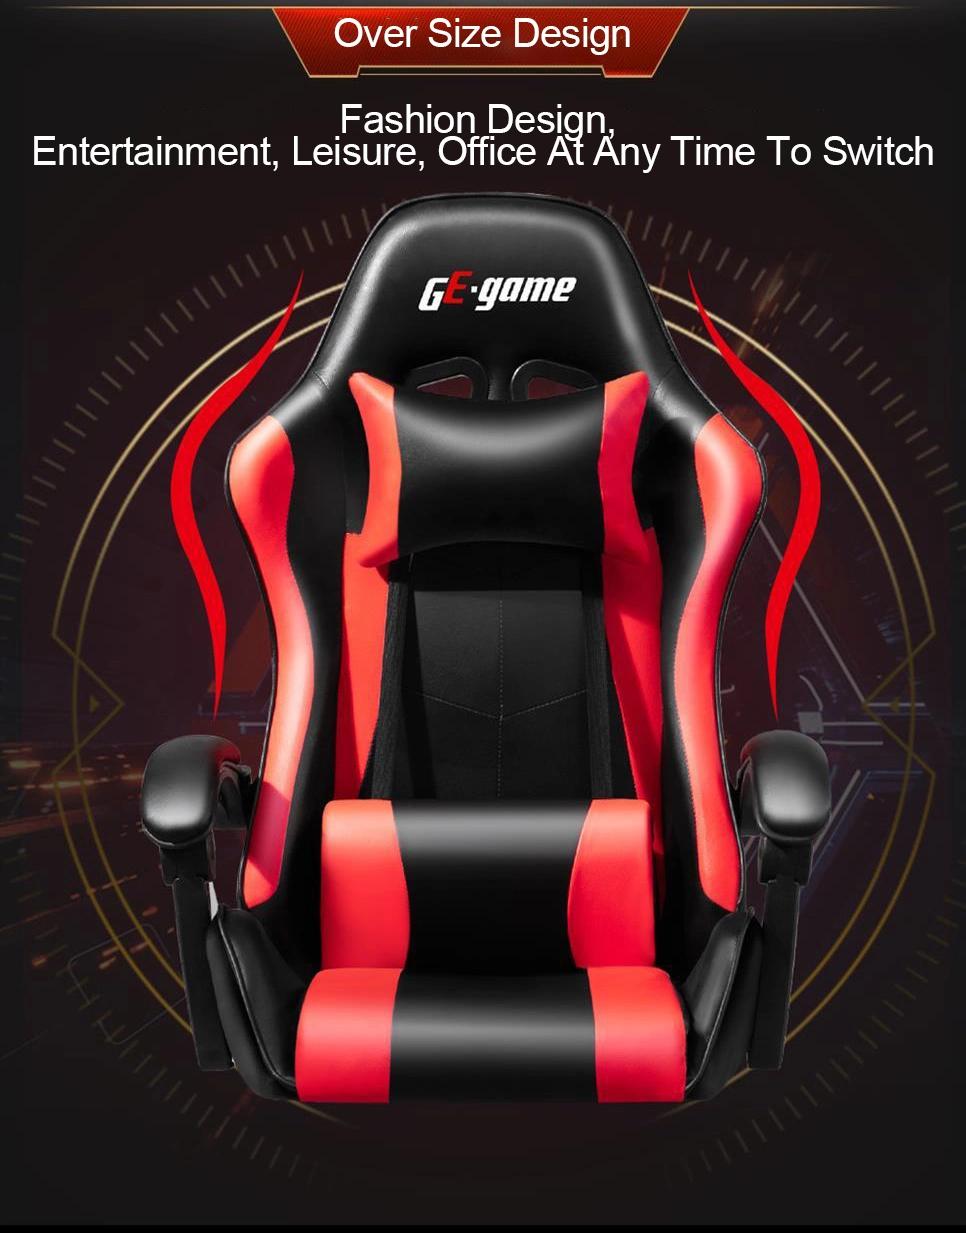 PC Silla Gamer Chair PU Leather Gaming Chair with Footrest